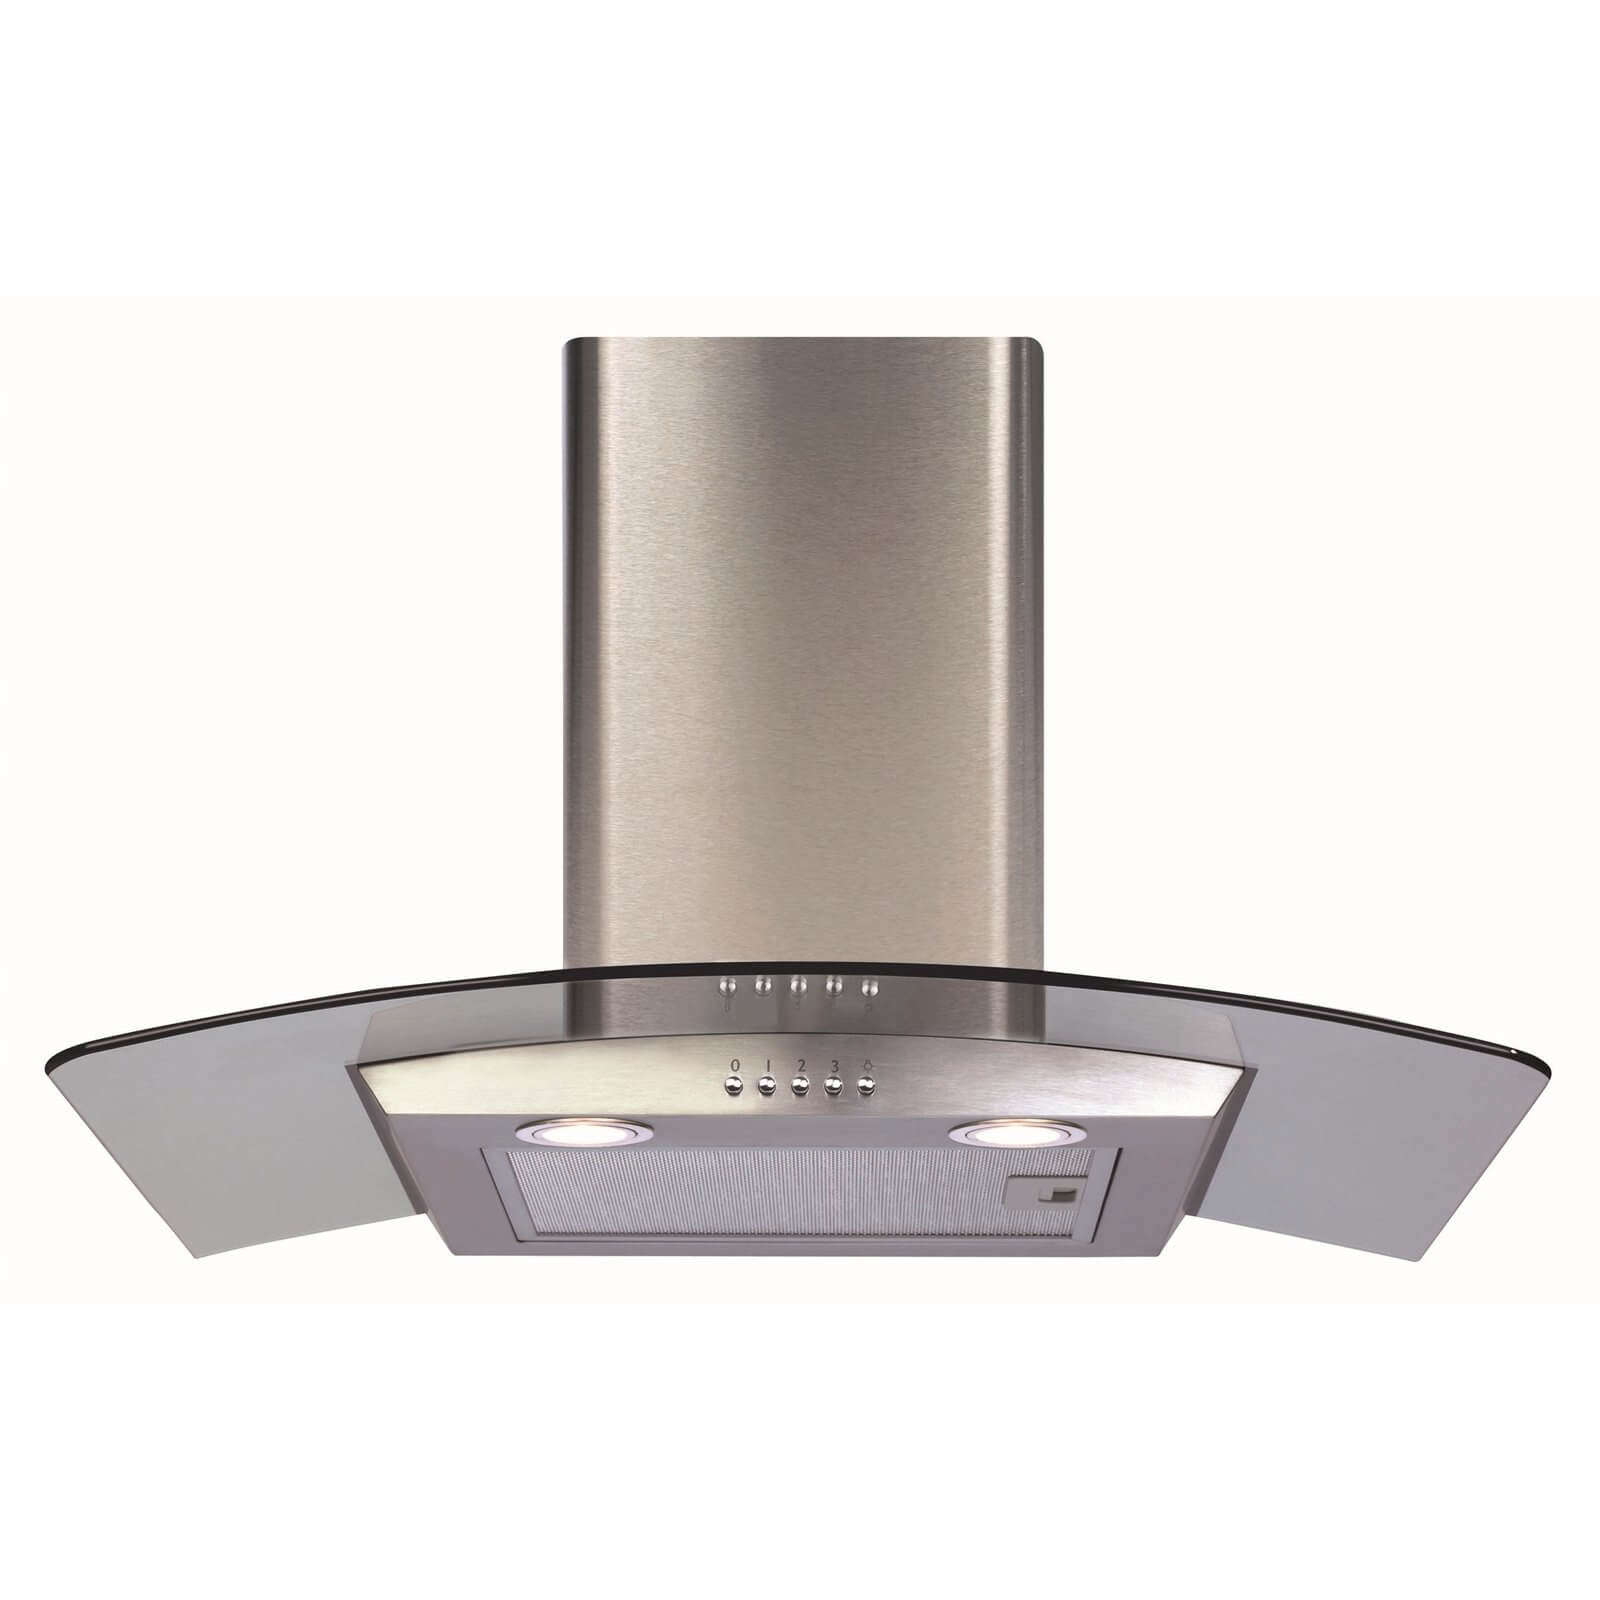 CDA ECP72SS Curved Glass Chimney Cooker Hood - 70cm - Stainless Steel